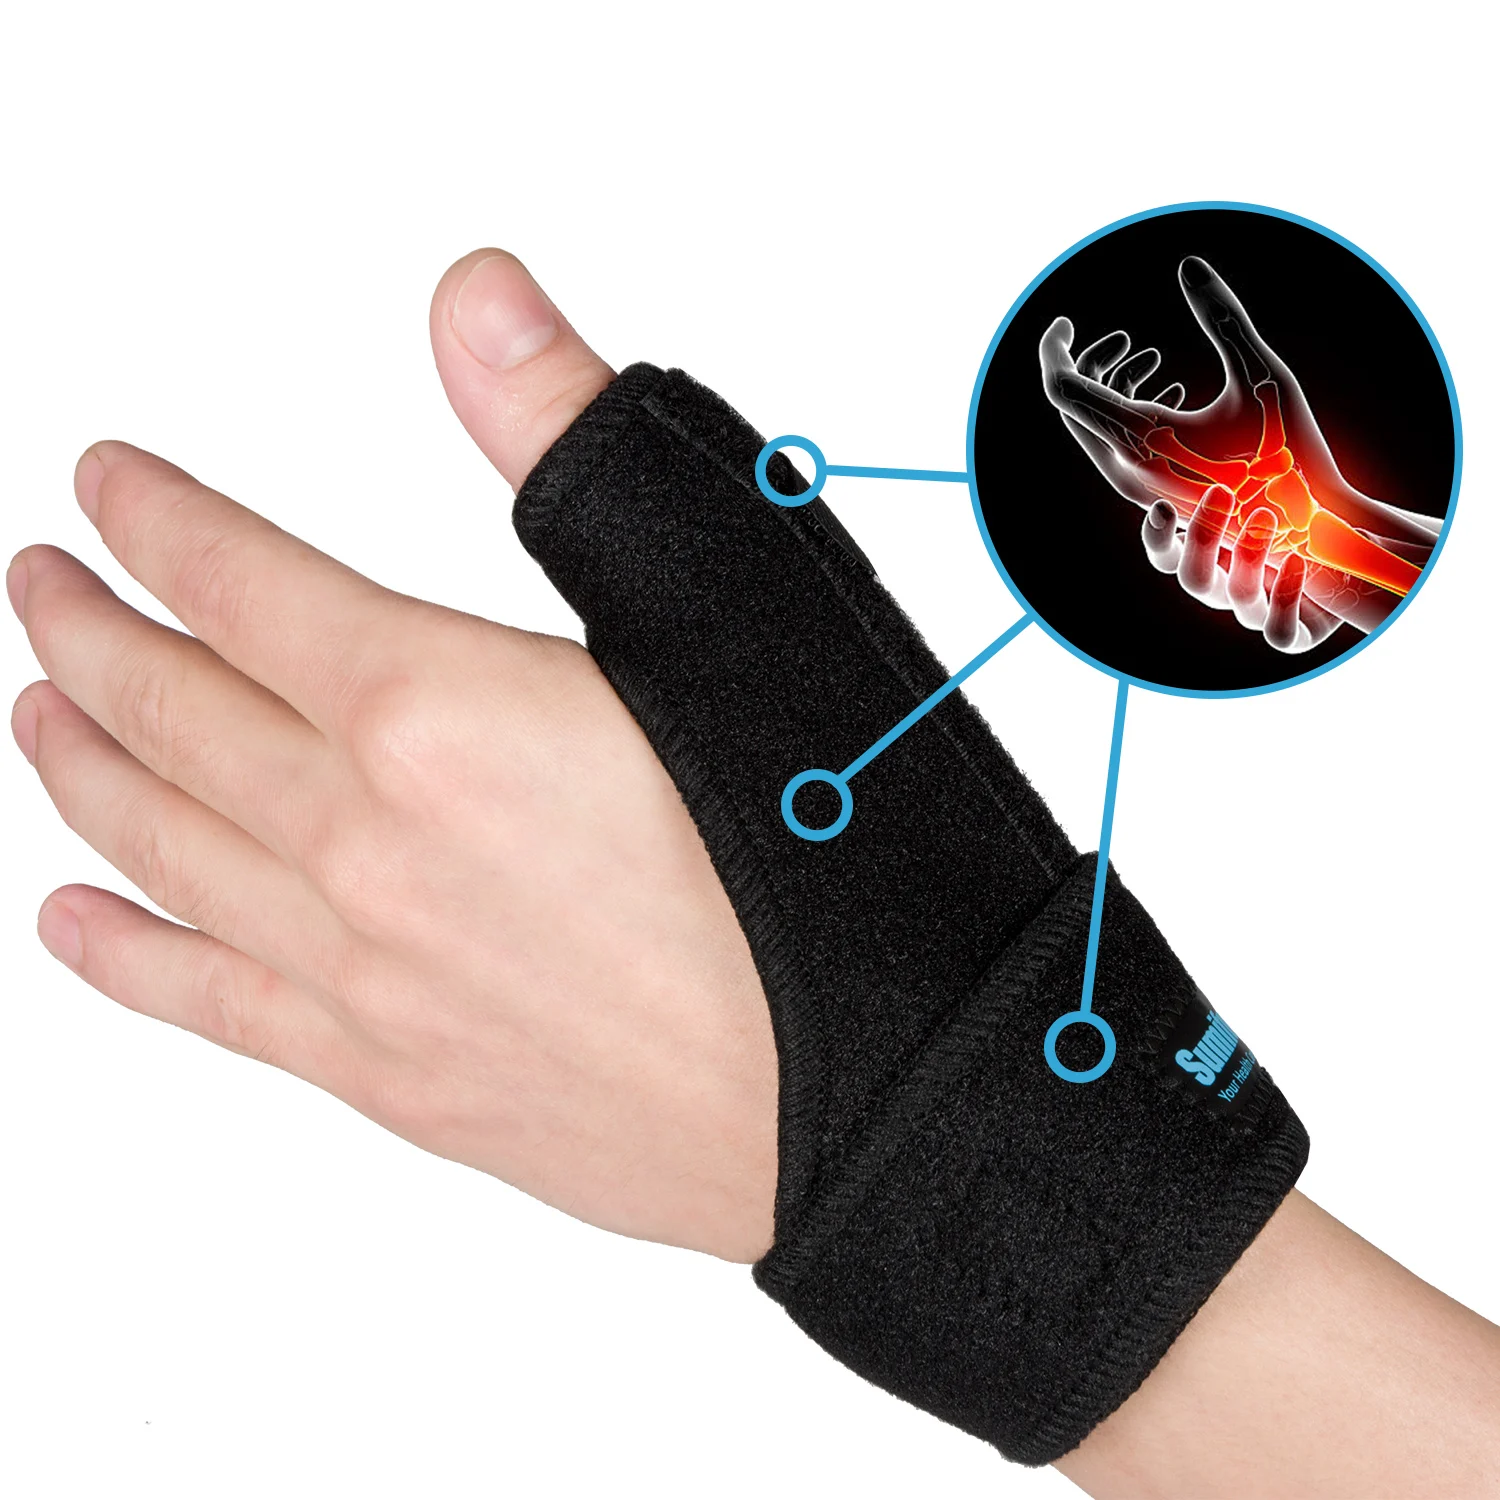 1pcs Hand Protecor Thumb Spica Wrist Brace Splint Support for Arthritis Tendonitis Carpal Tunnel Pain Relief C1572 obduktion pain chronicles 1 cd